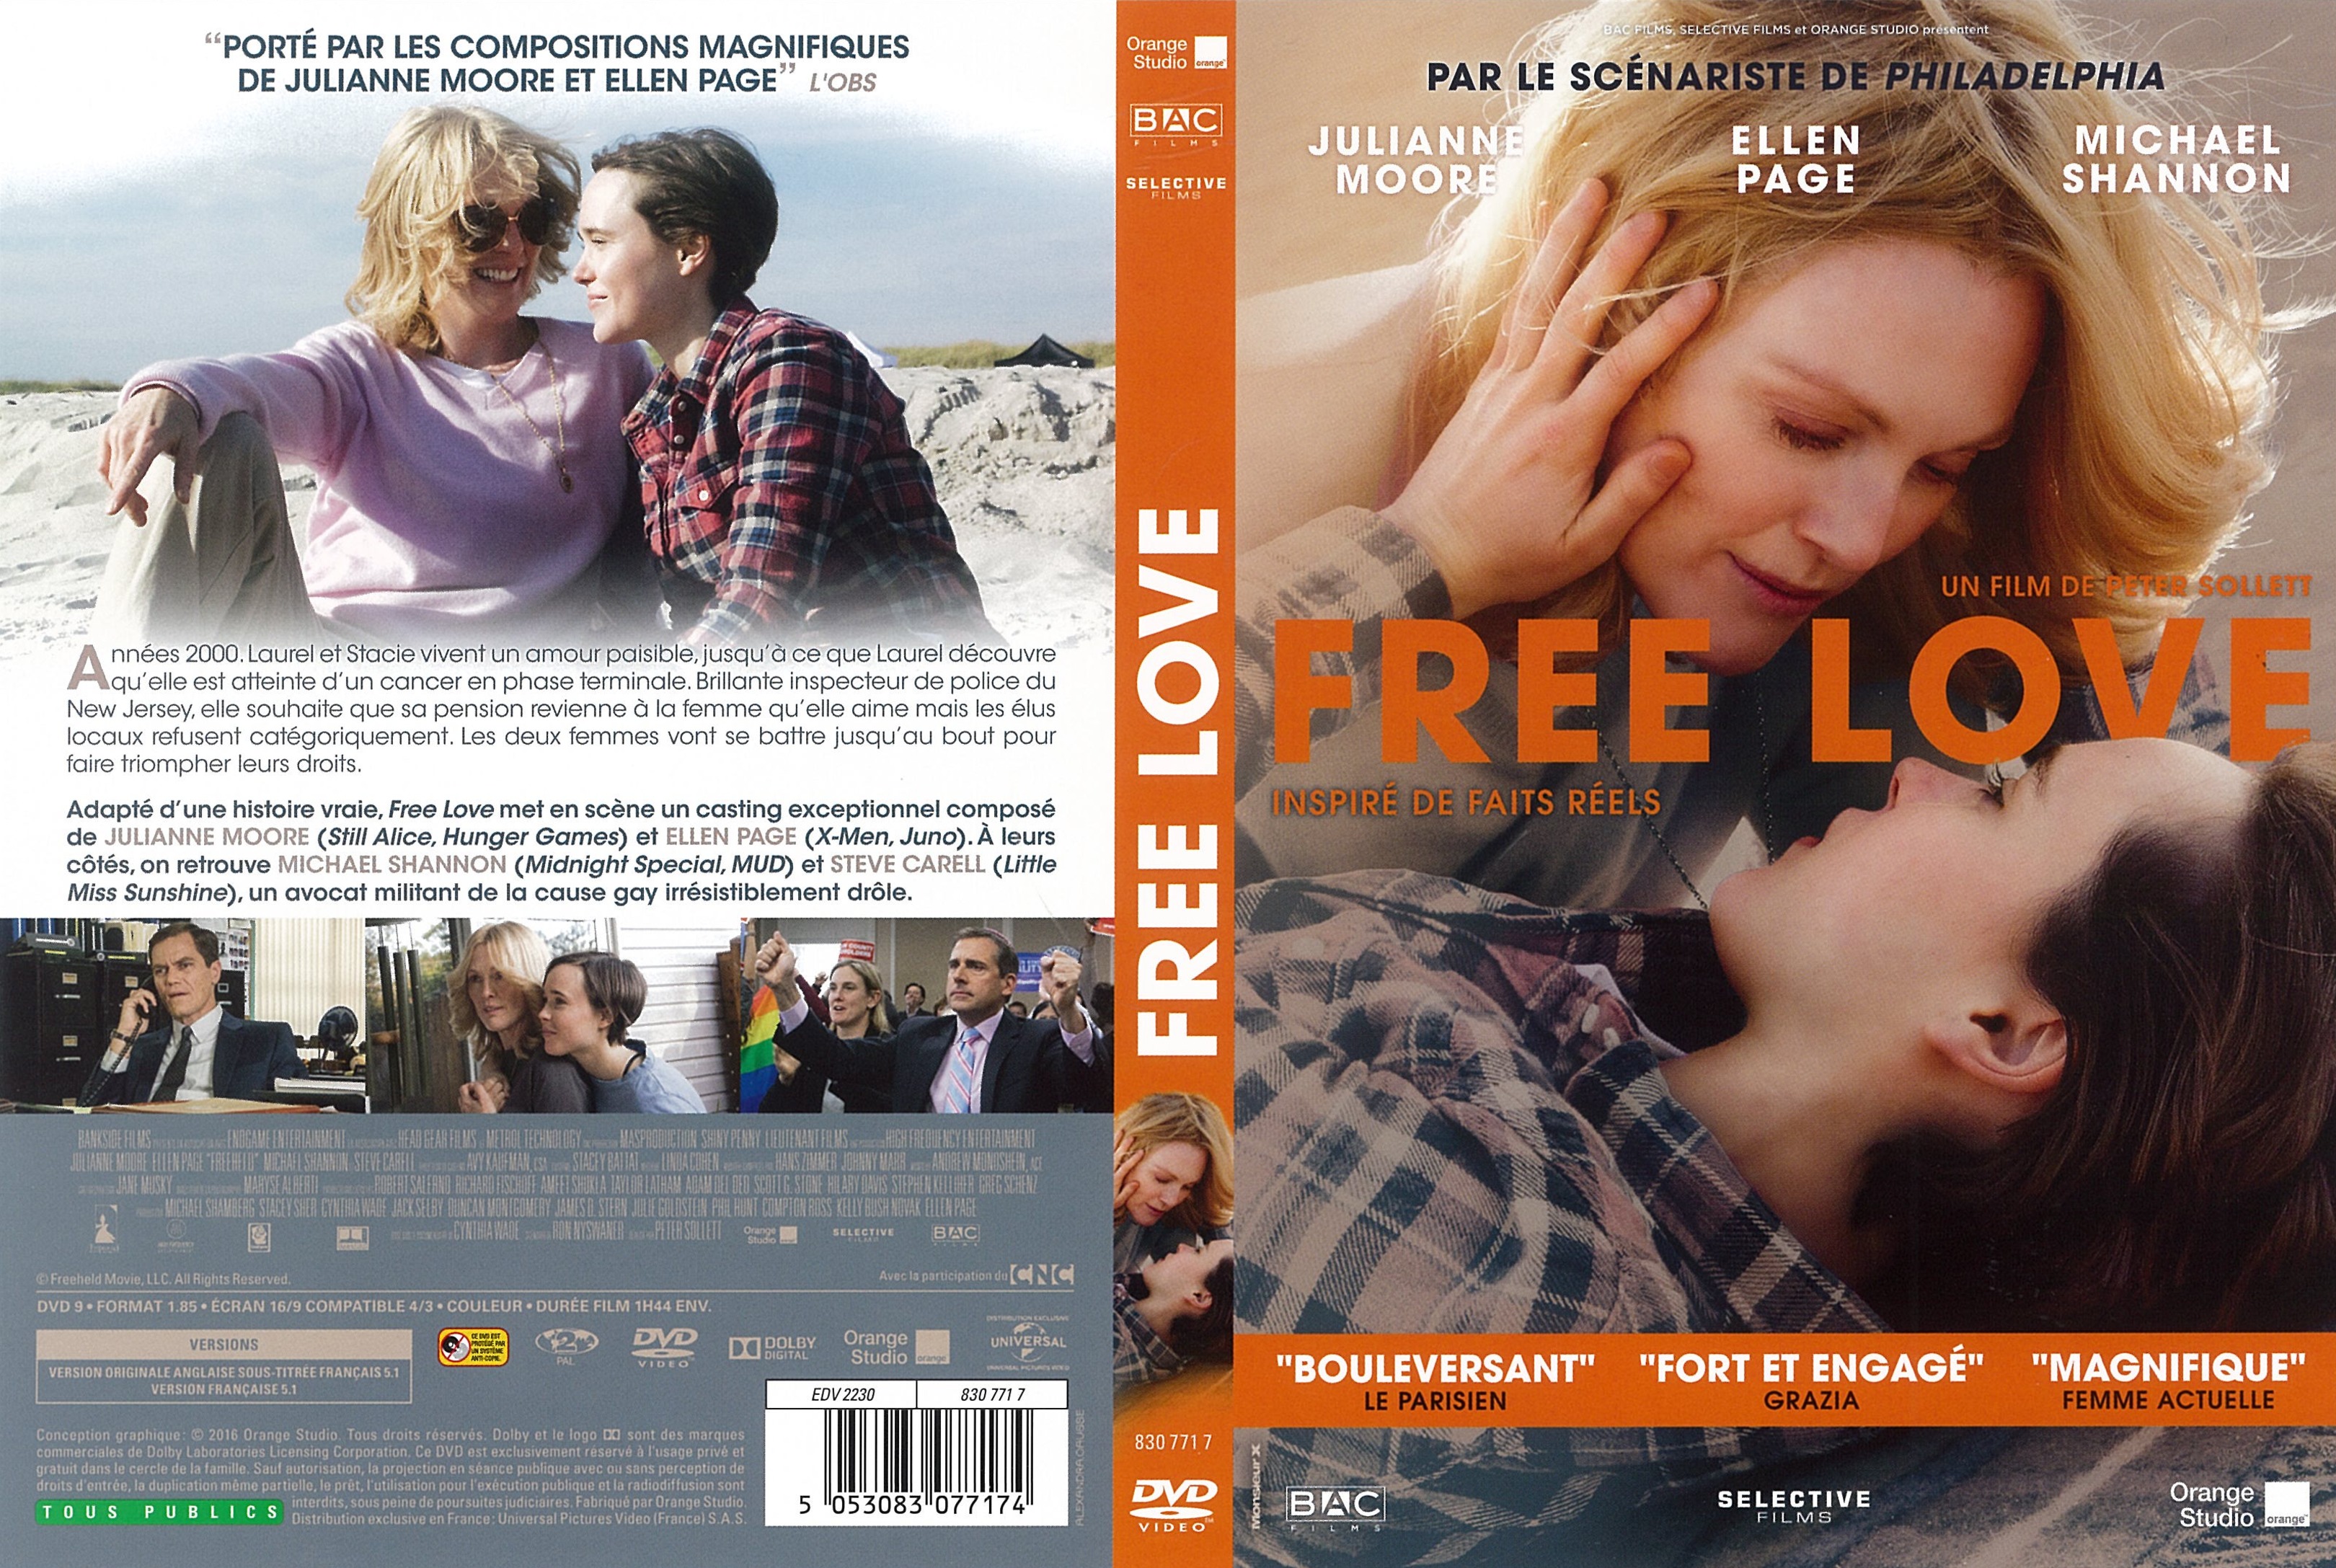 Jaquette DVD Free Love